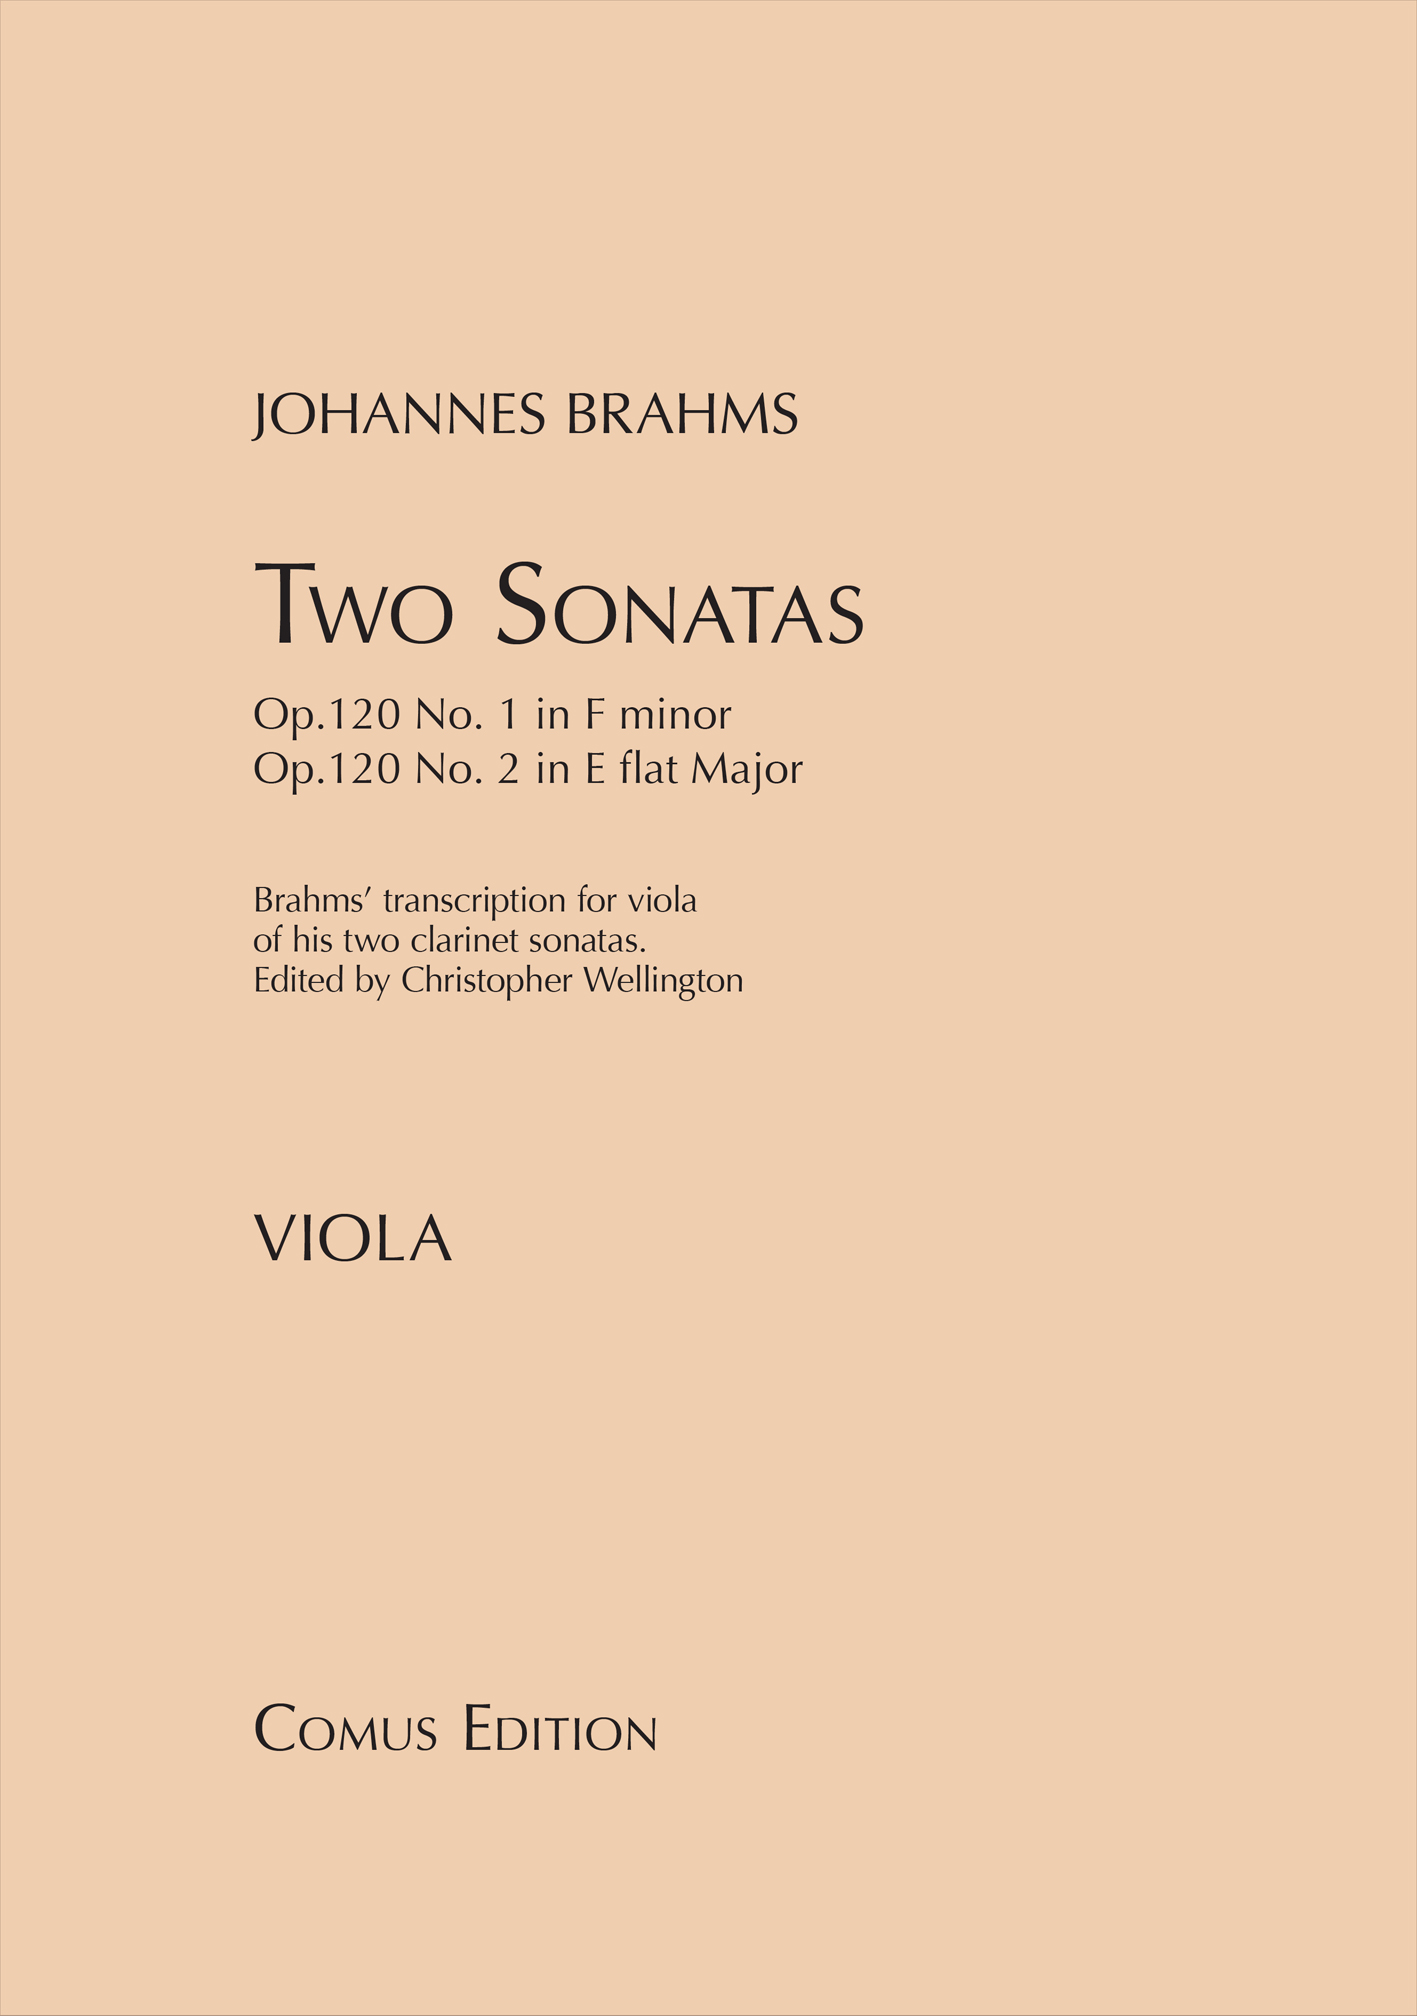 Outer cover of item The Clarinet Sonatas Op.120 (trsc. for viola)